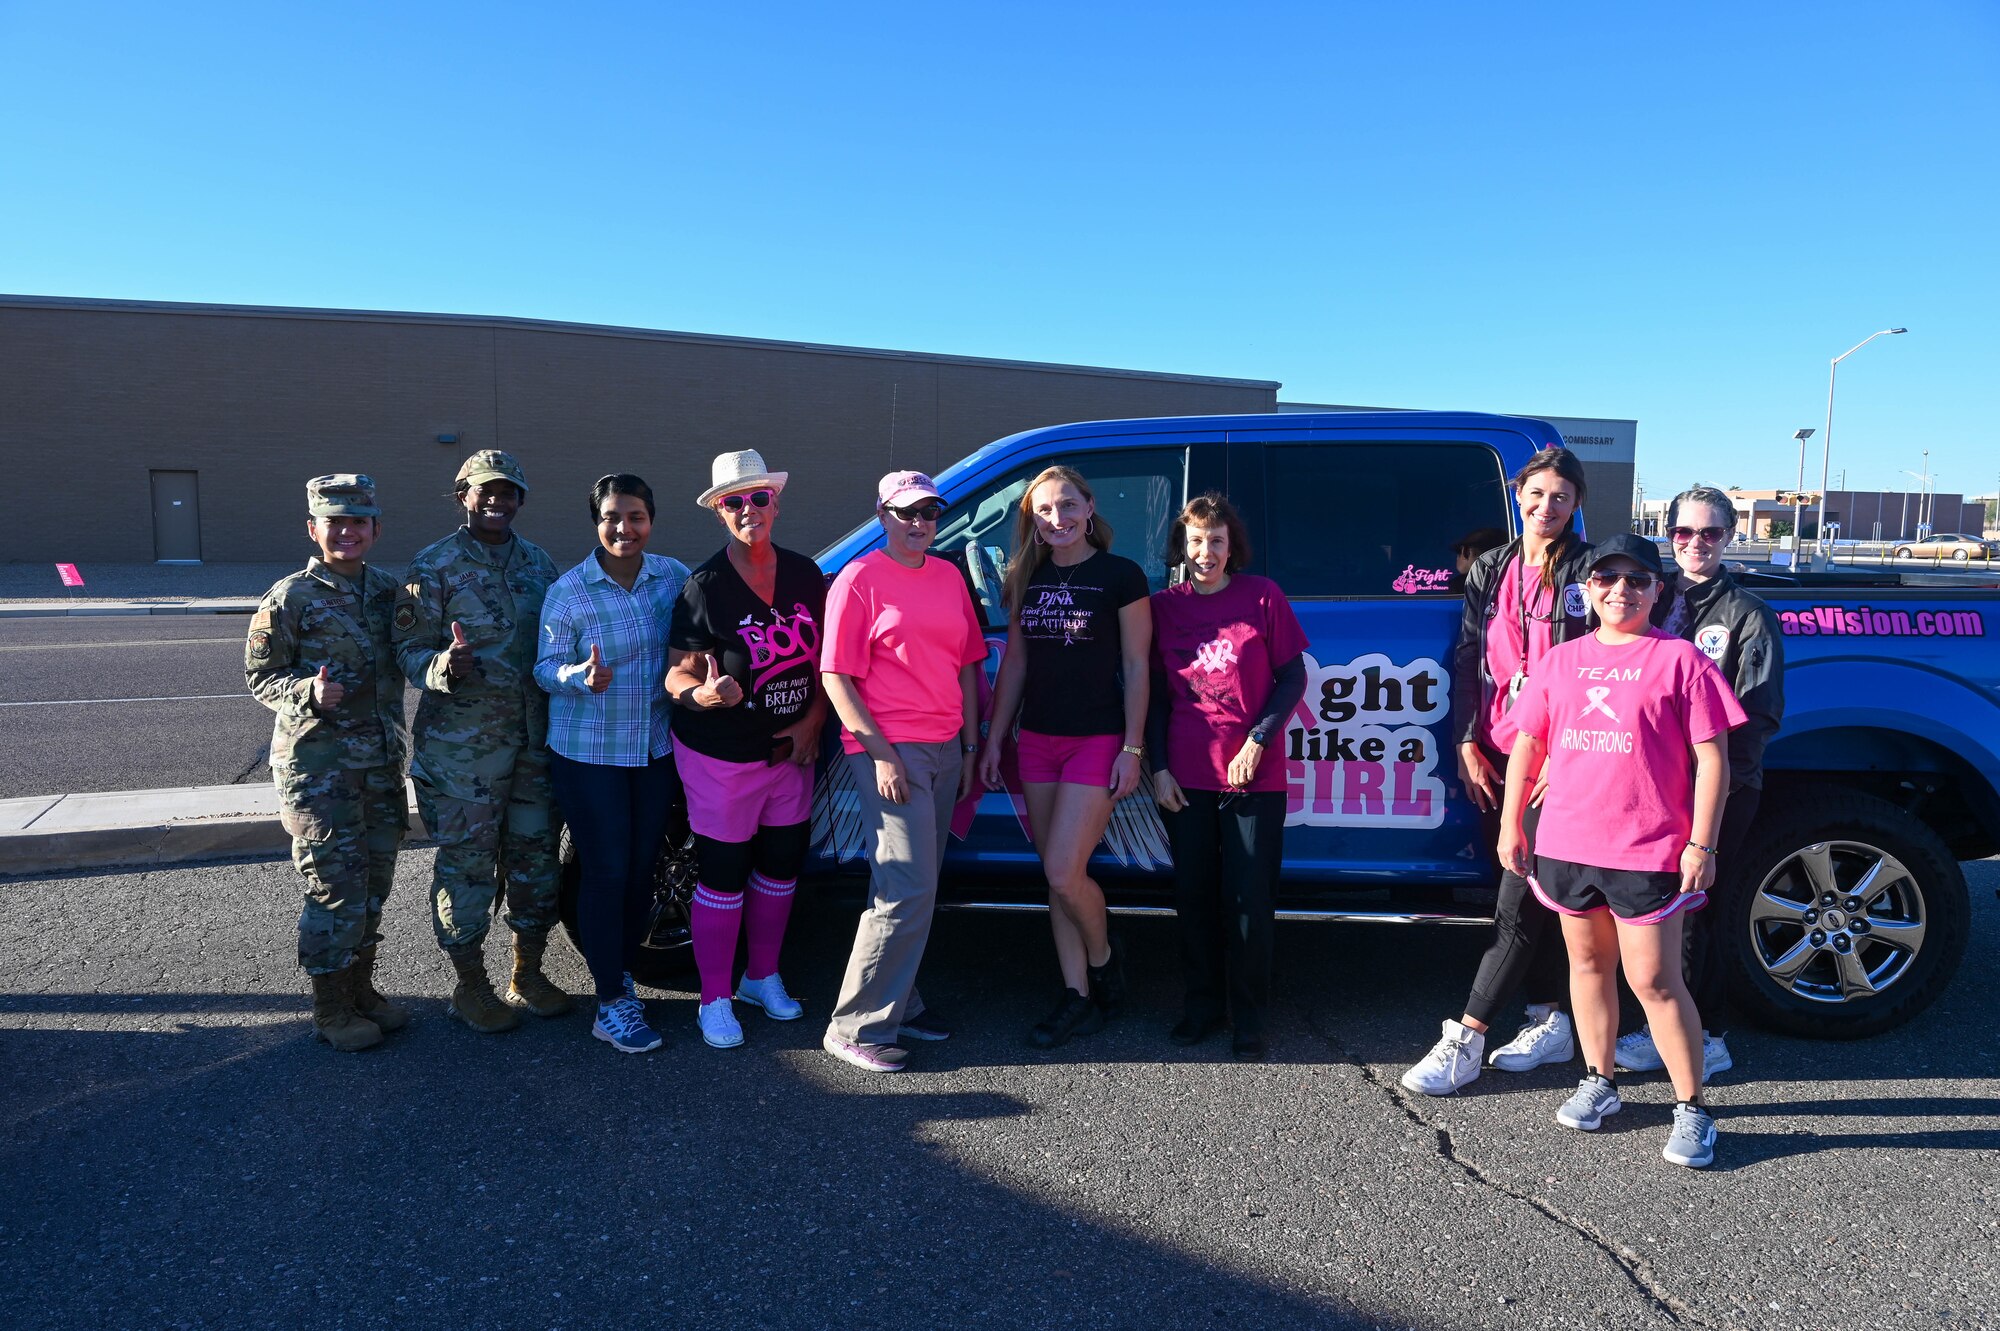 Members of the 56th Medical Group and the awareness organization Reba’s Vision pose in front of a promotional vehicle during a breast cancer awareness event Oct. 5, 2022, at Luke Air Force Base, Arizona.